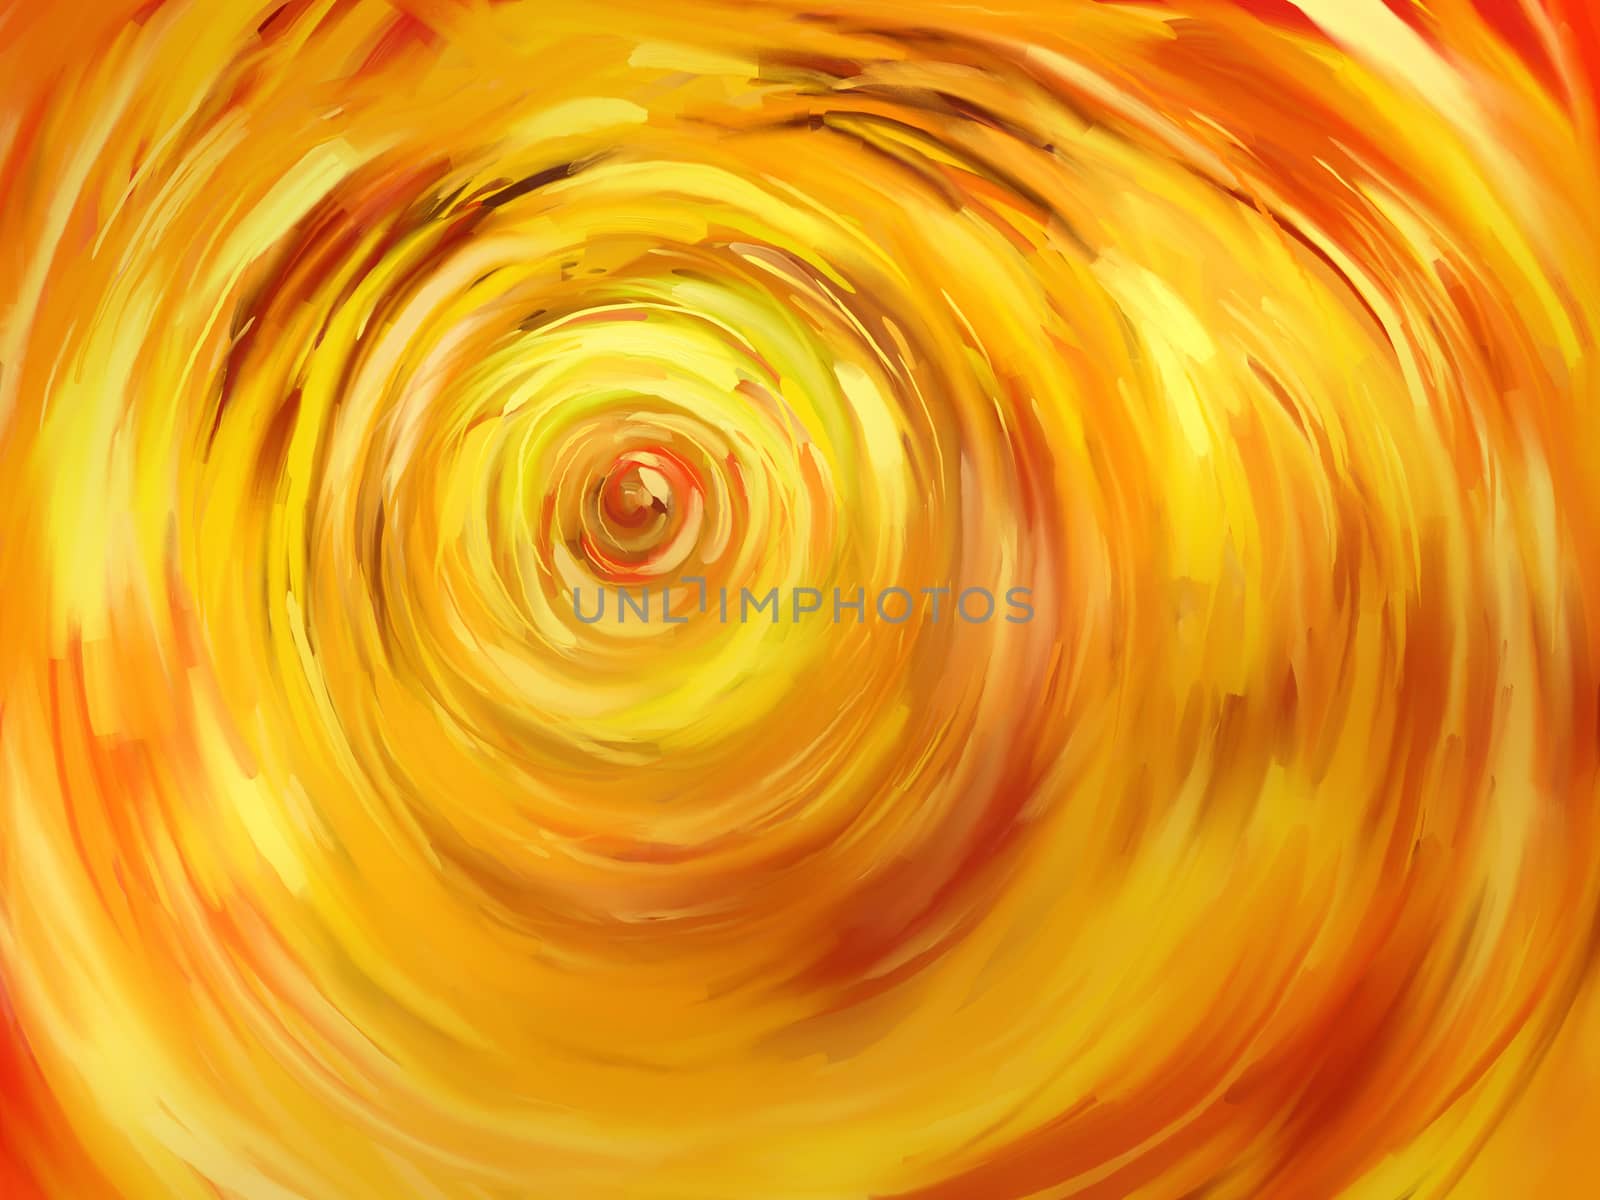 Digital Painting Abstract Textured Background for Design